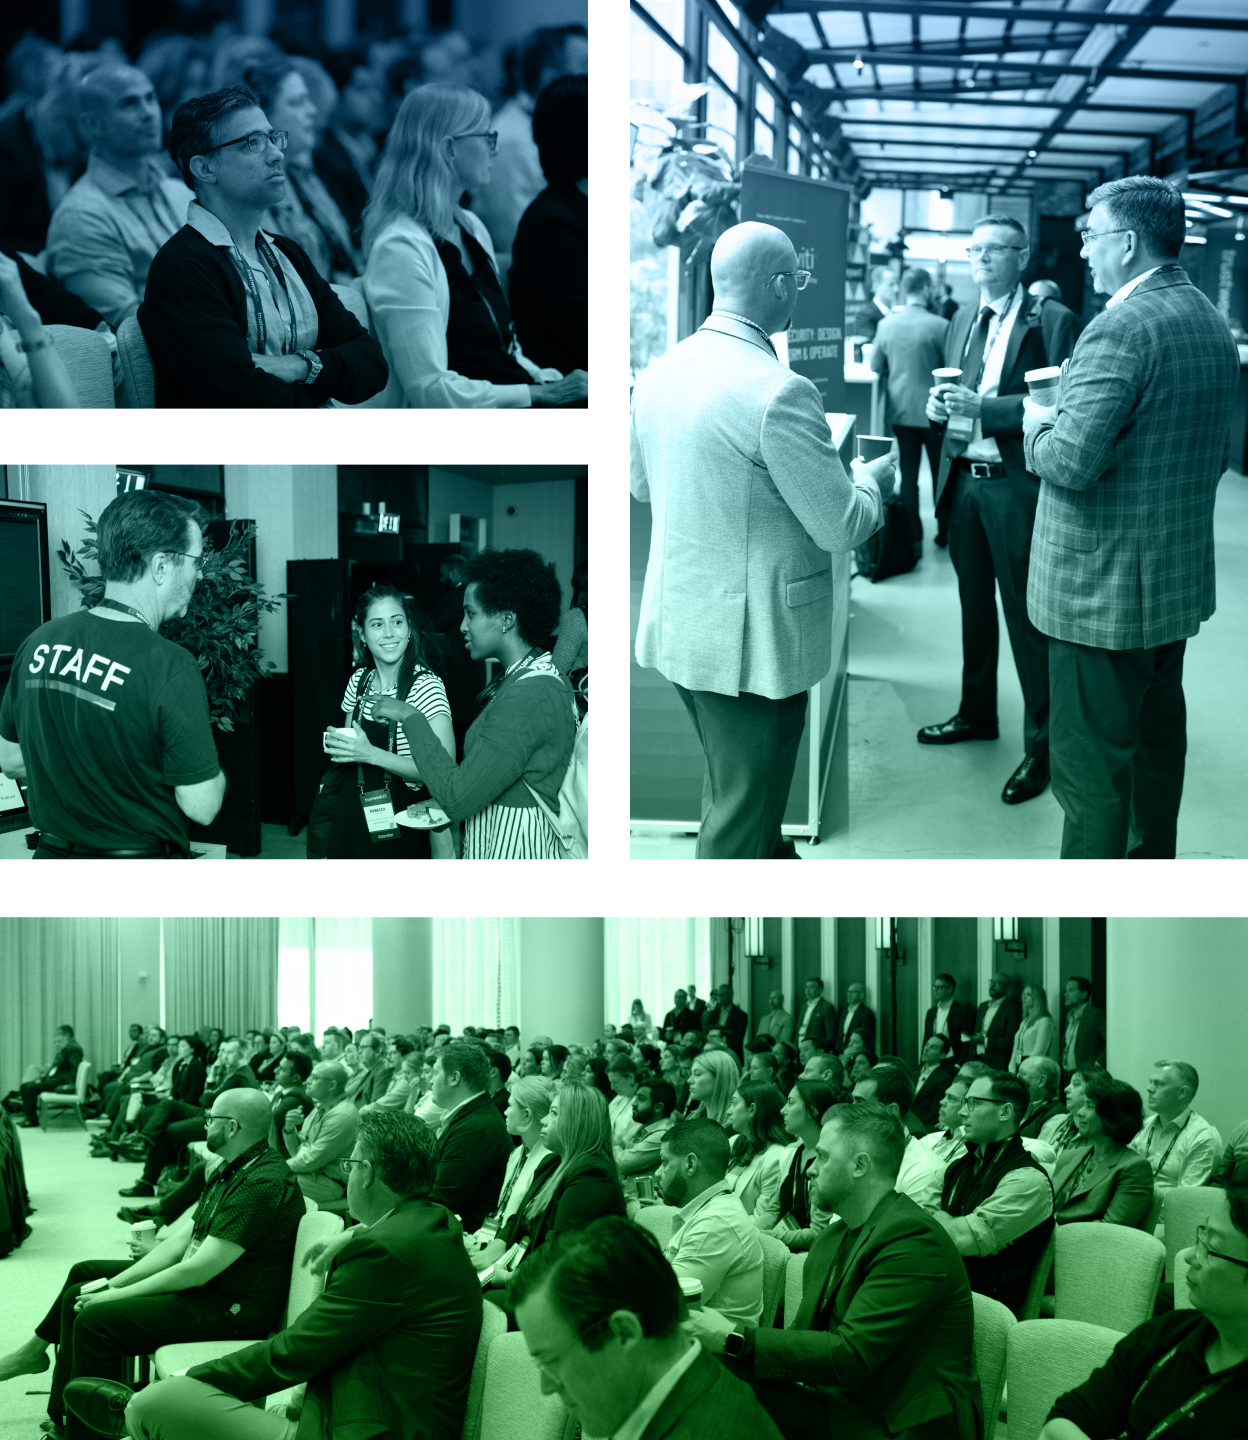 A collage of photos from TrustWeek featuring experts chatting, colleagues networking, and a crowd of attendees watching a presentation in the event space